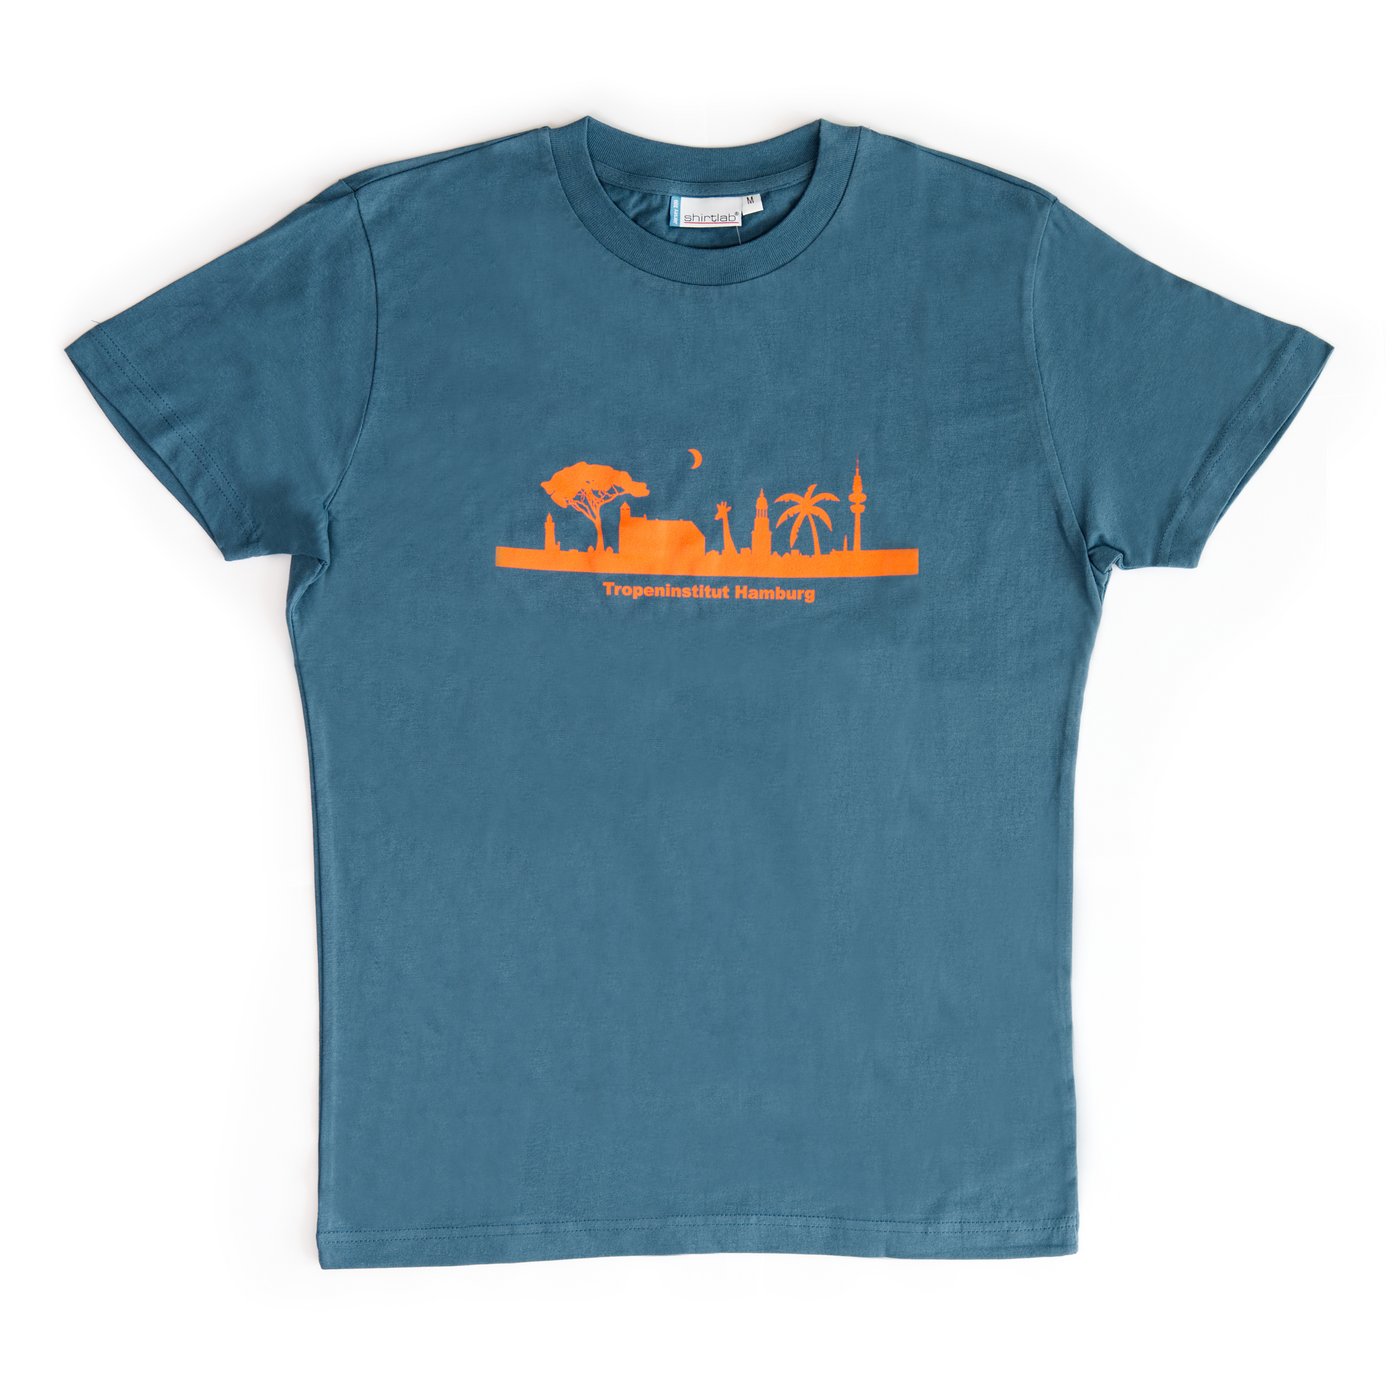 The image shows a cyan T-Shirt with a print.